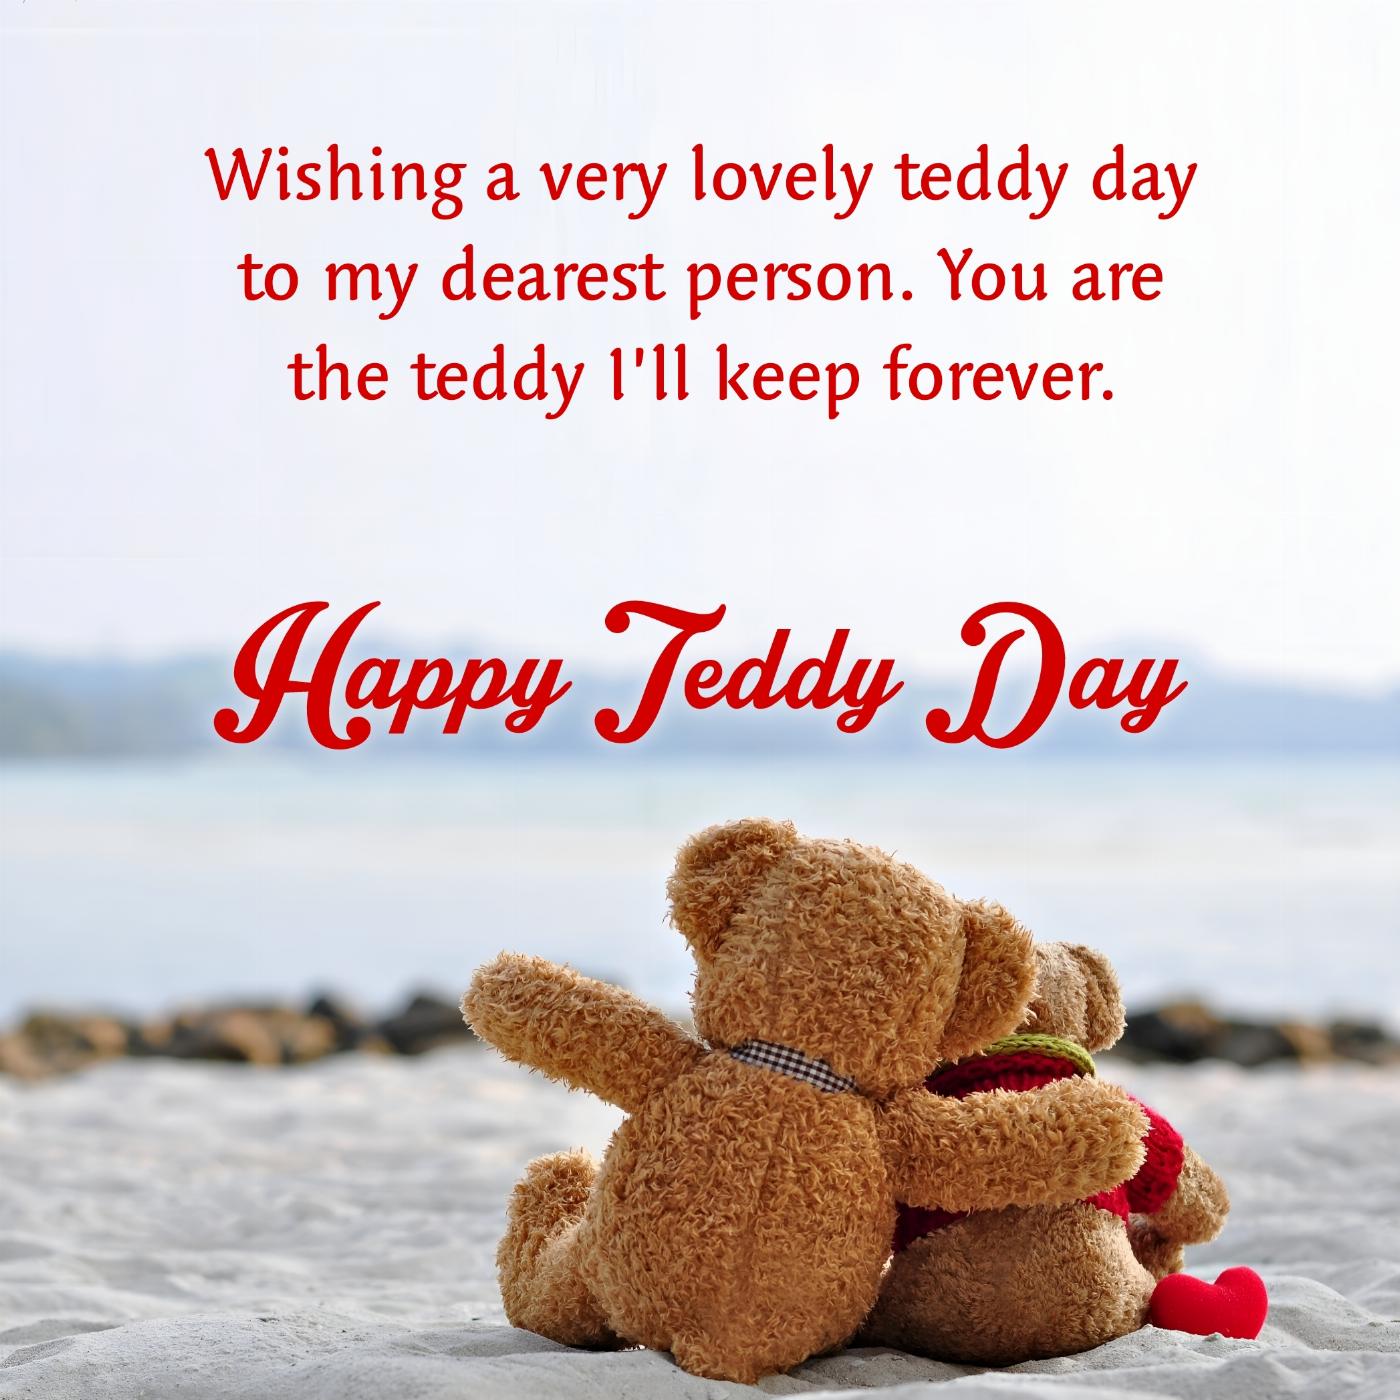 Wishing a very lovely teddy day to my dearest person